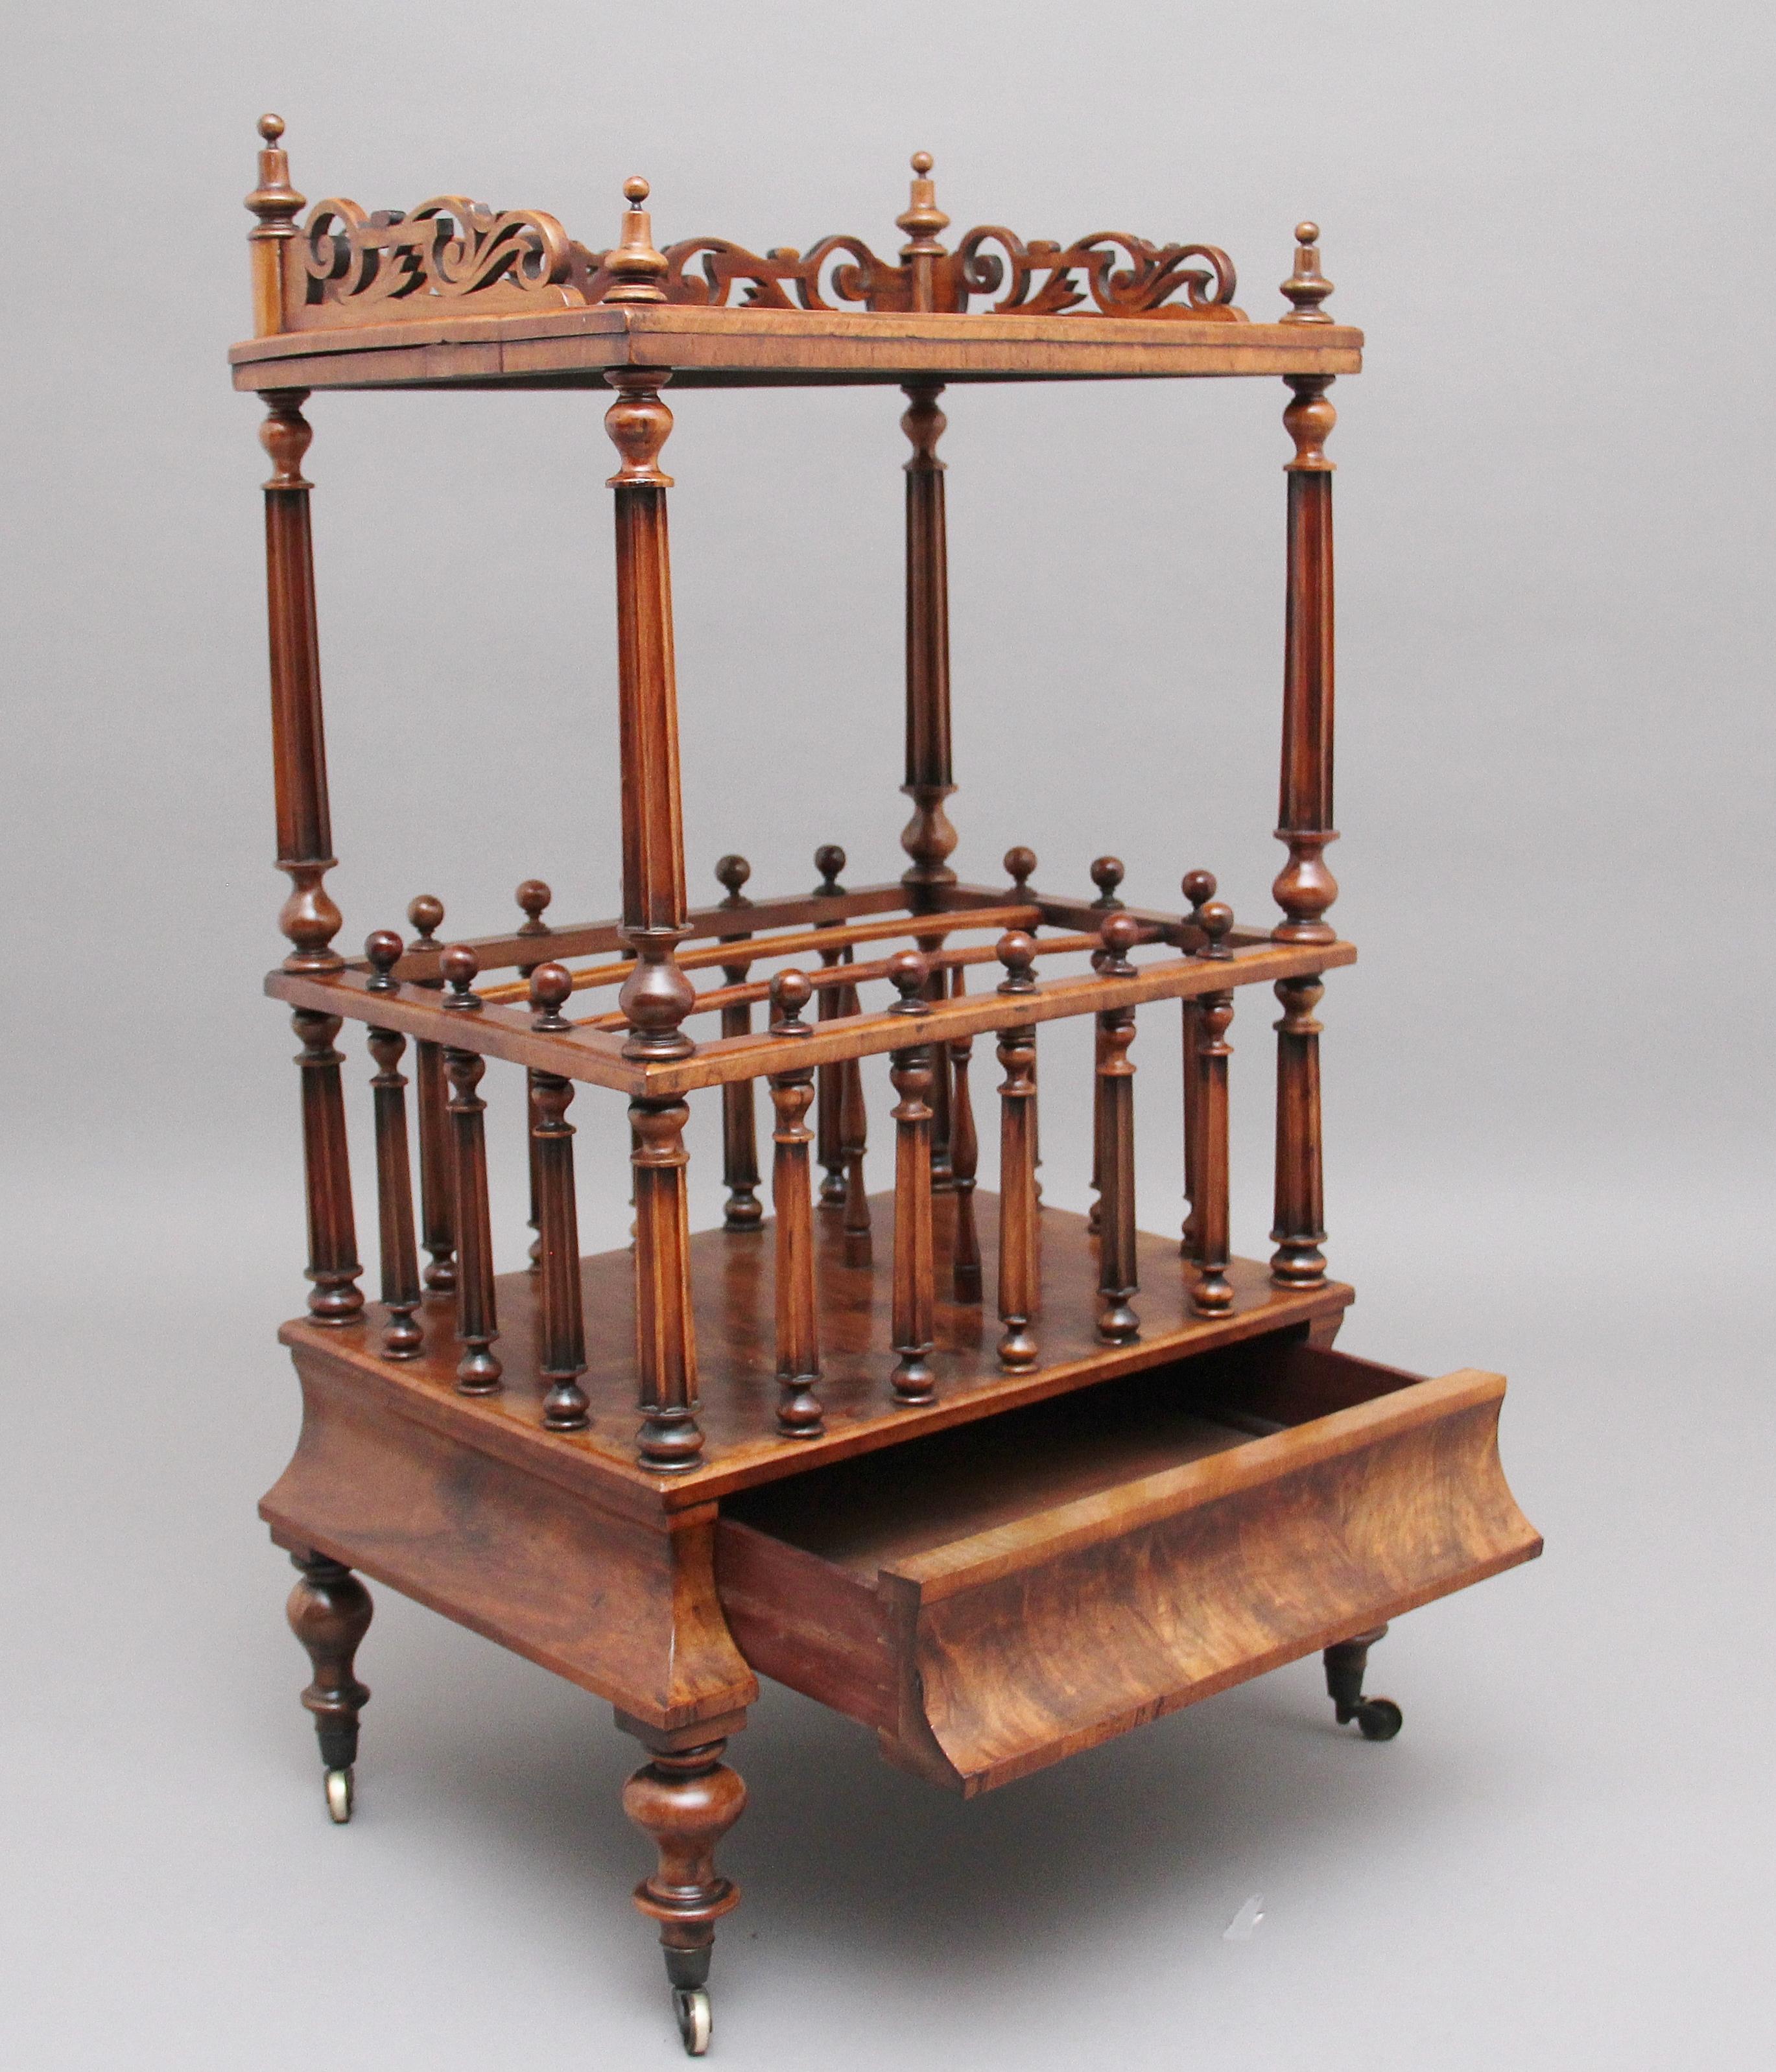 19th century burr walnut Canterbury, the burr walnut top having a pierced and carved gallery decorated with turned finials, supported on finely turned fluted columns, the middle section having three divisions surrounded by finely turned fluted